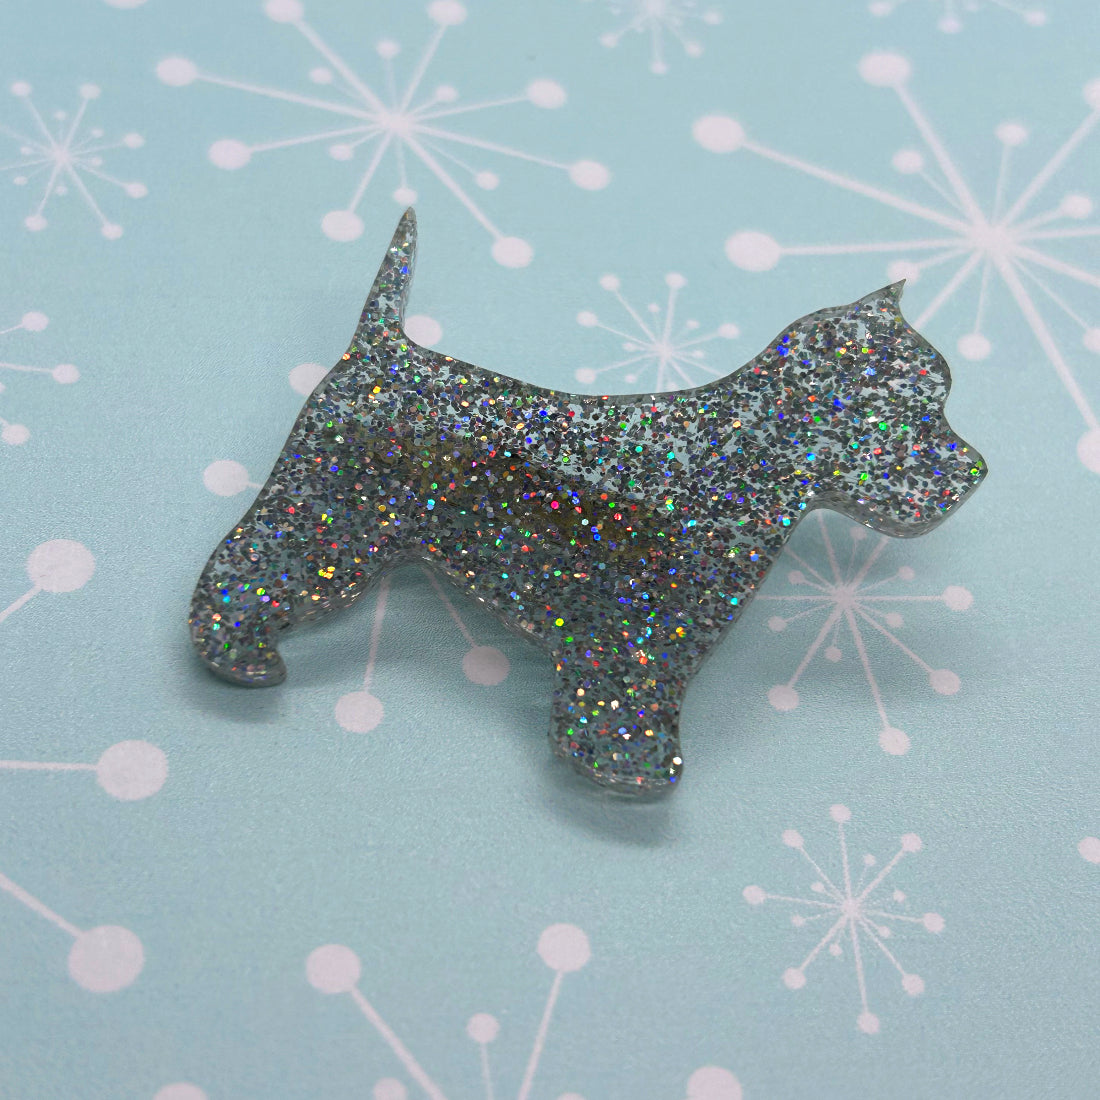 Acrylic Westie brooches and necklaces - The Argentum Design Co